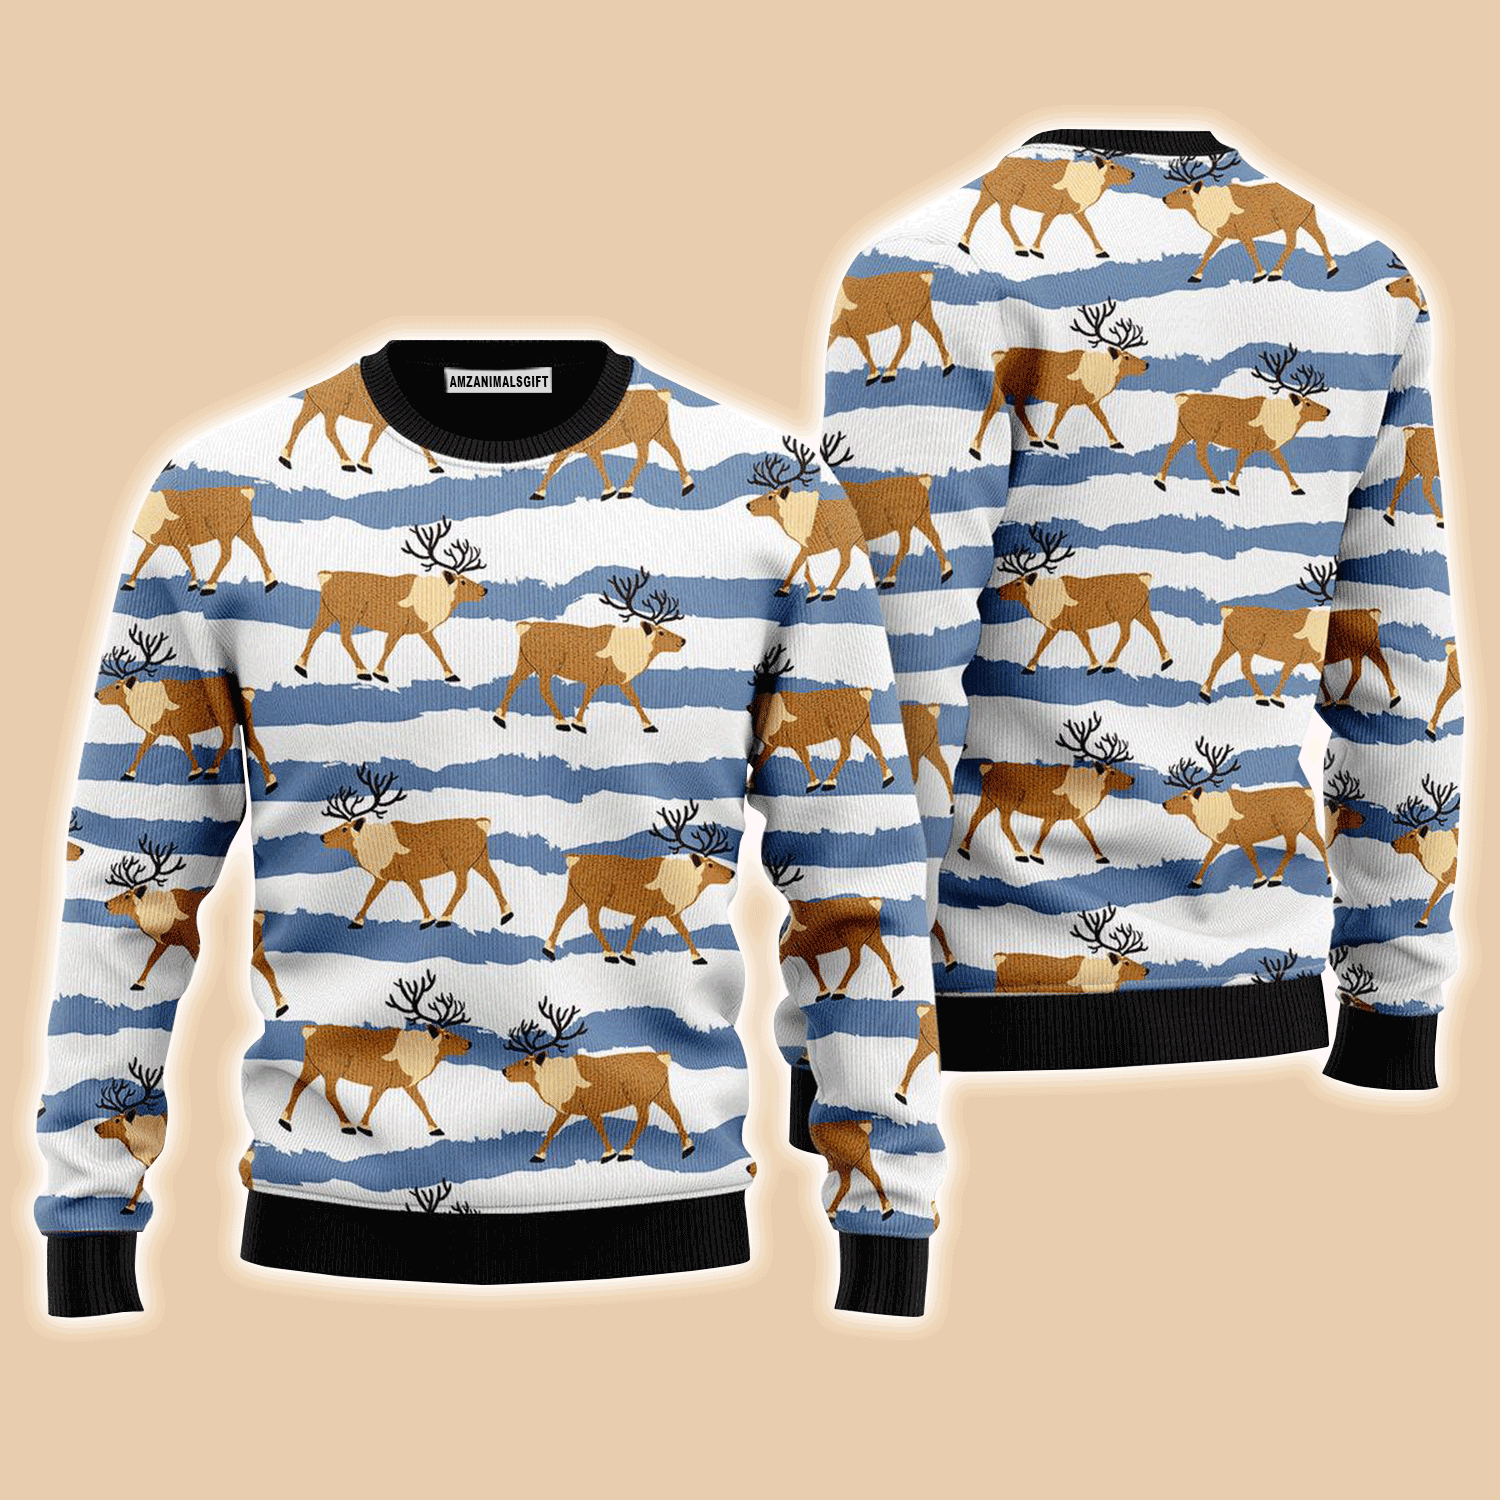 Deer Walking On The Snow Sweater Christmas, Ugly Sweater For Men & Women, Perfect Outfit For Christmas New Year Autumn Winter